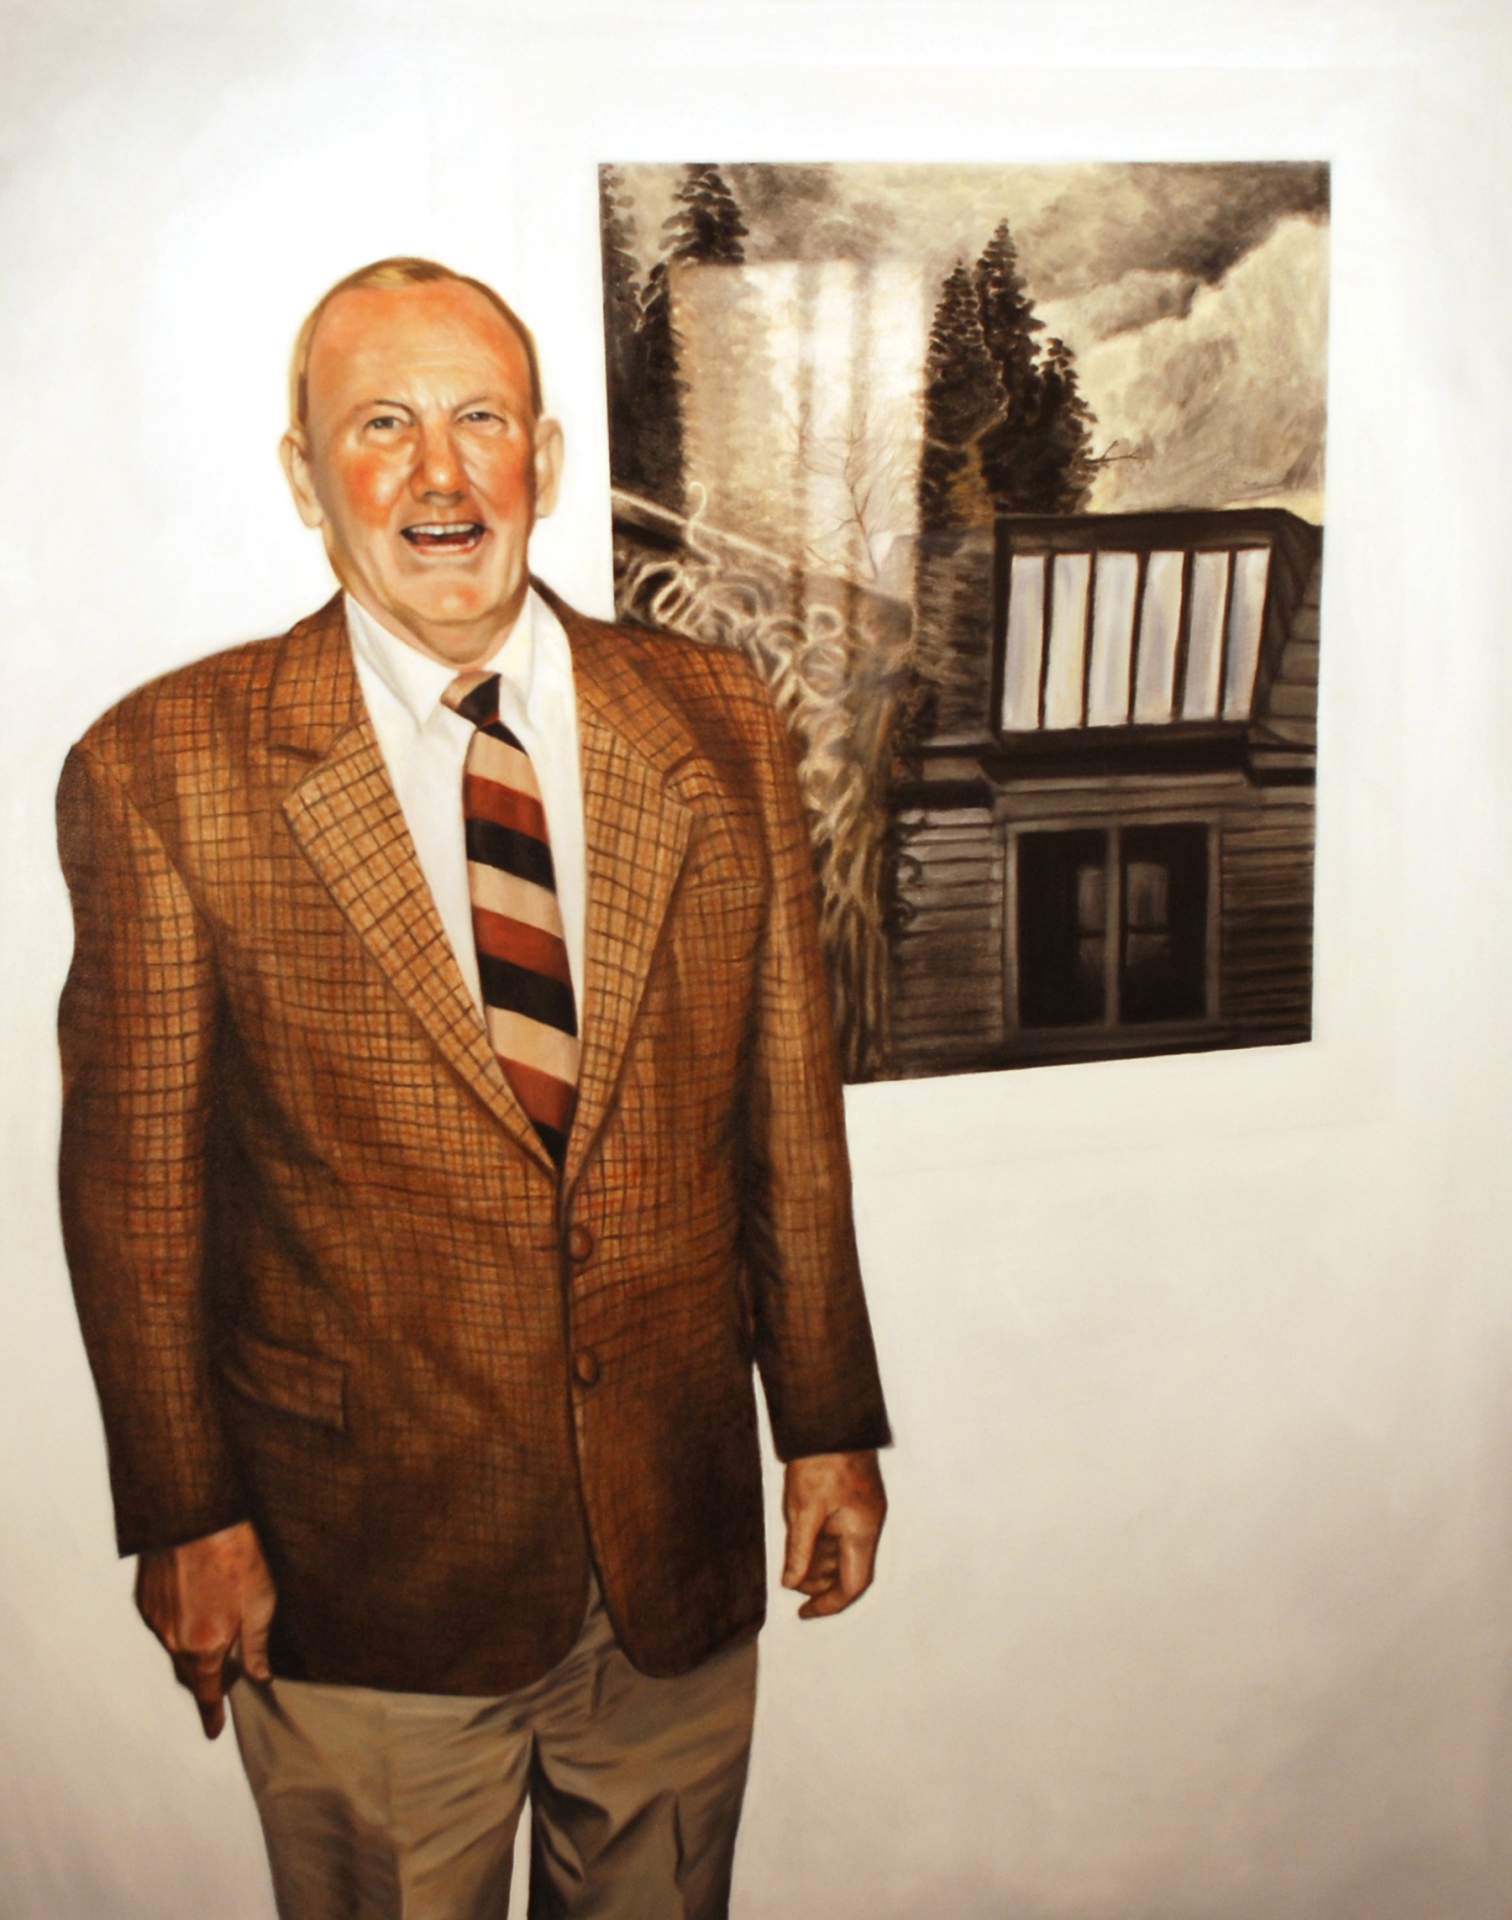 Picture of Charles with Painting--Burchfield Penney, Buffalo